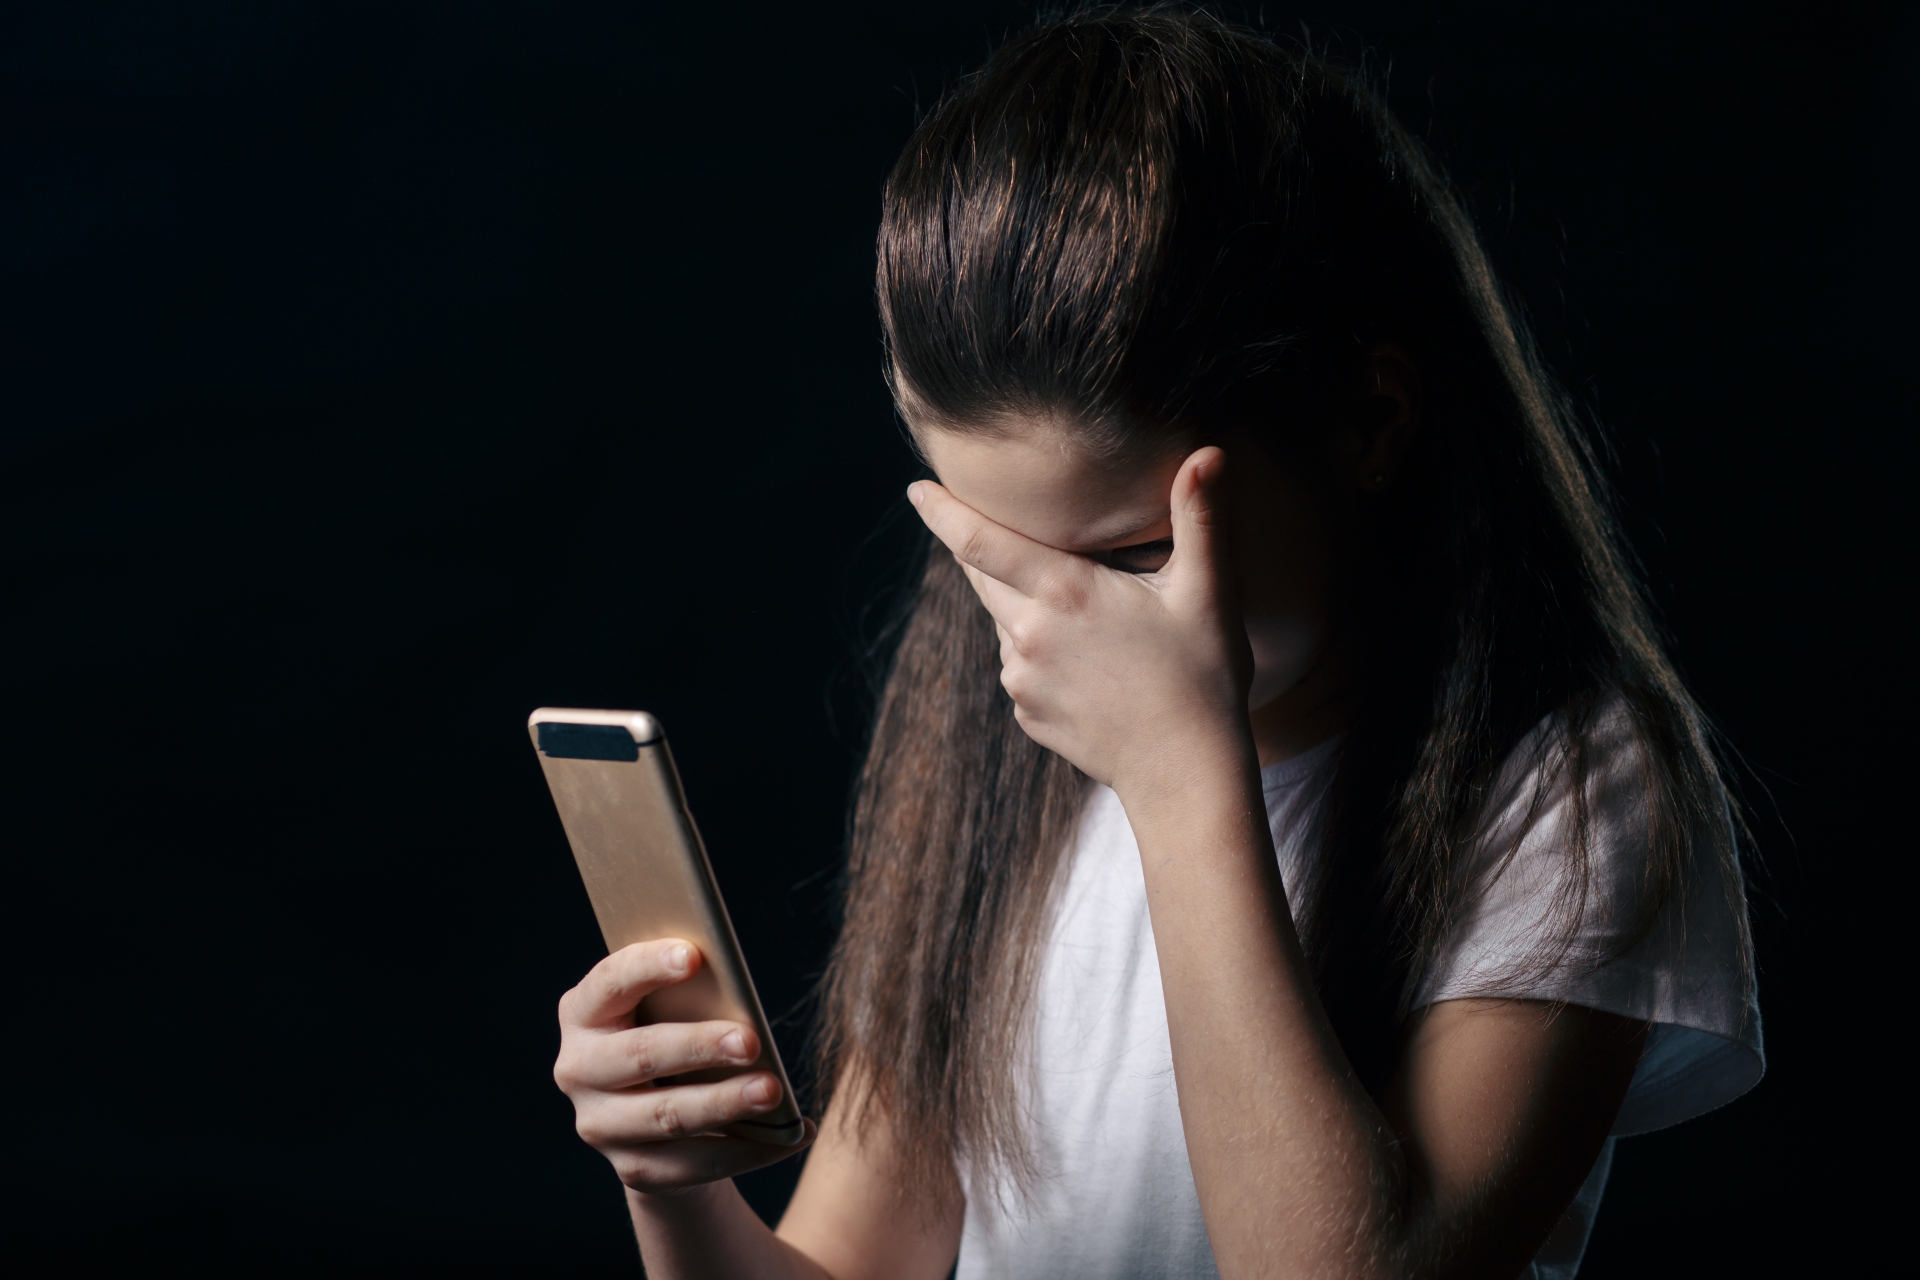 Cyberbullying, Sexting, and Snapchat: It’s Time To Take This App Seriously - Free Teens Youth - Changing Minds, Transforming Lives